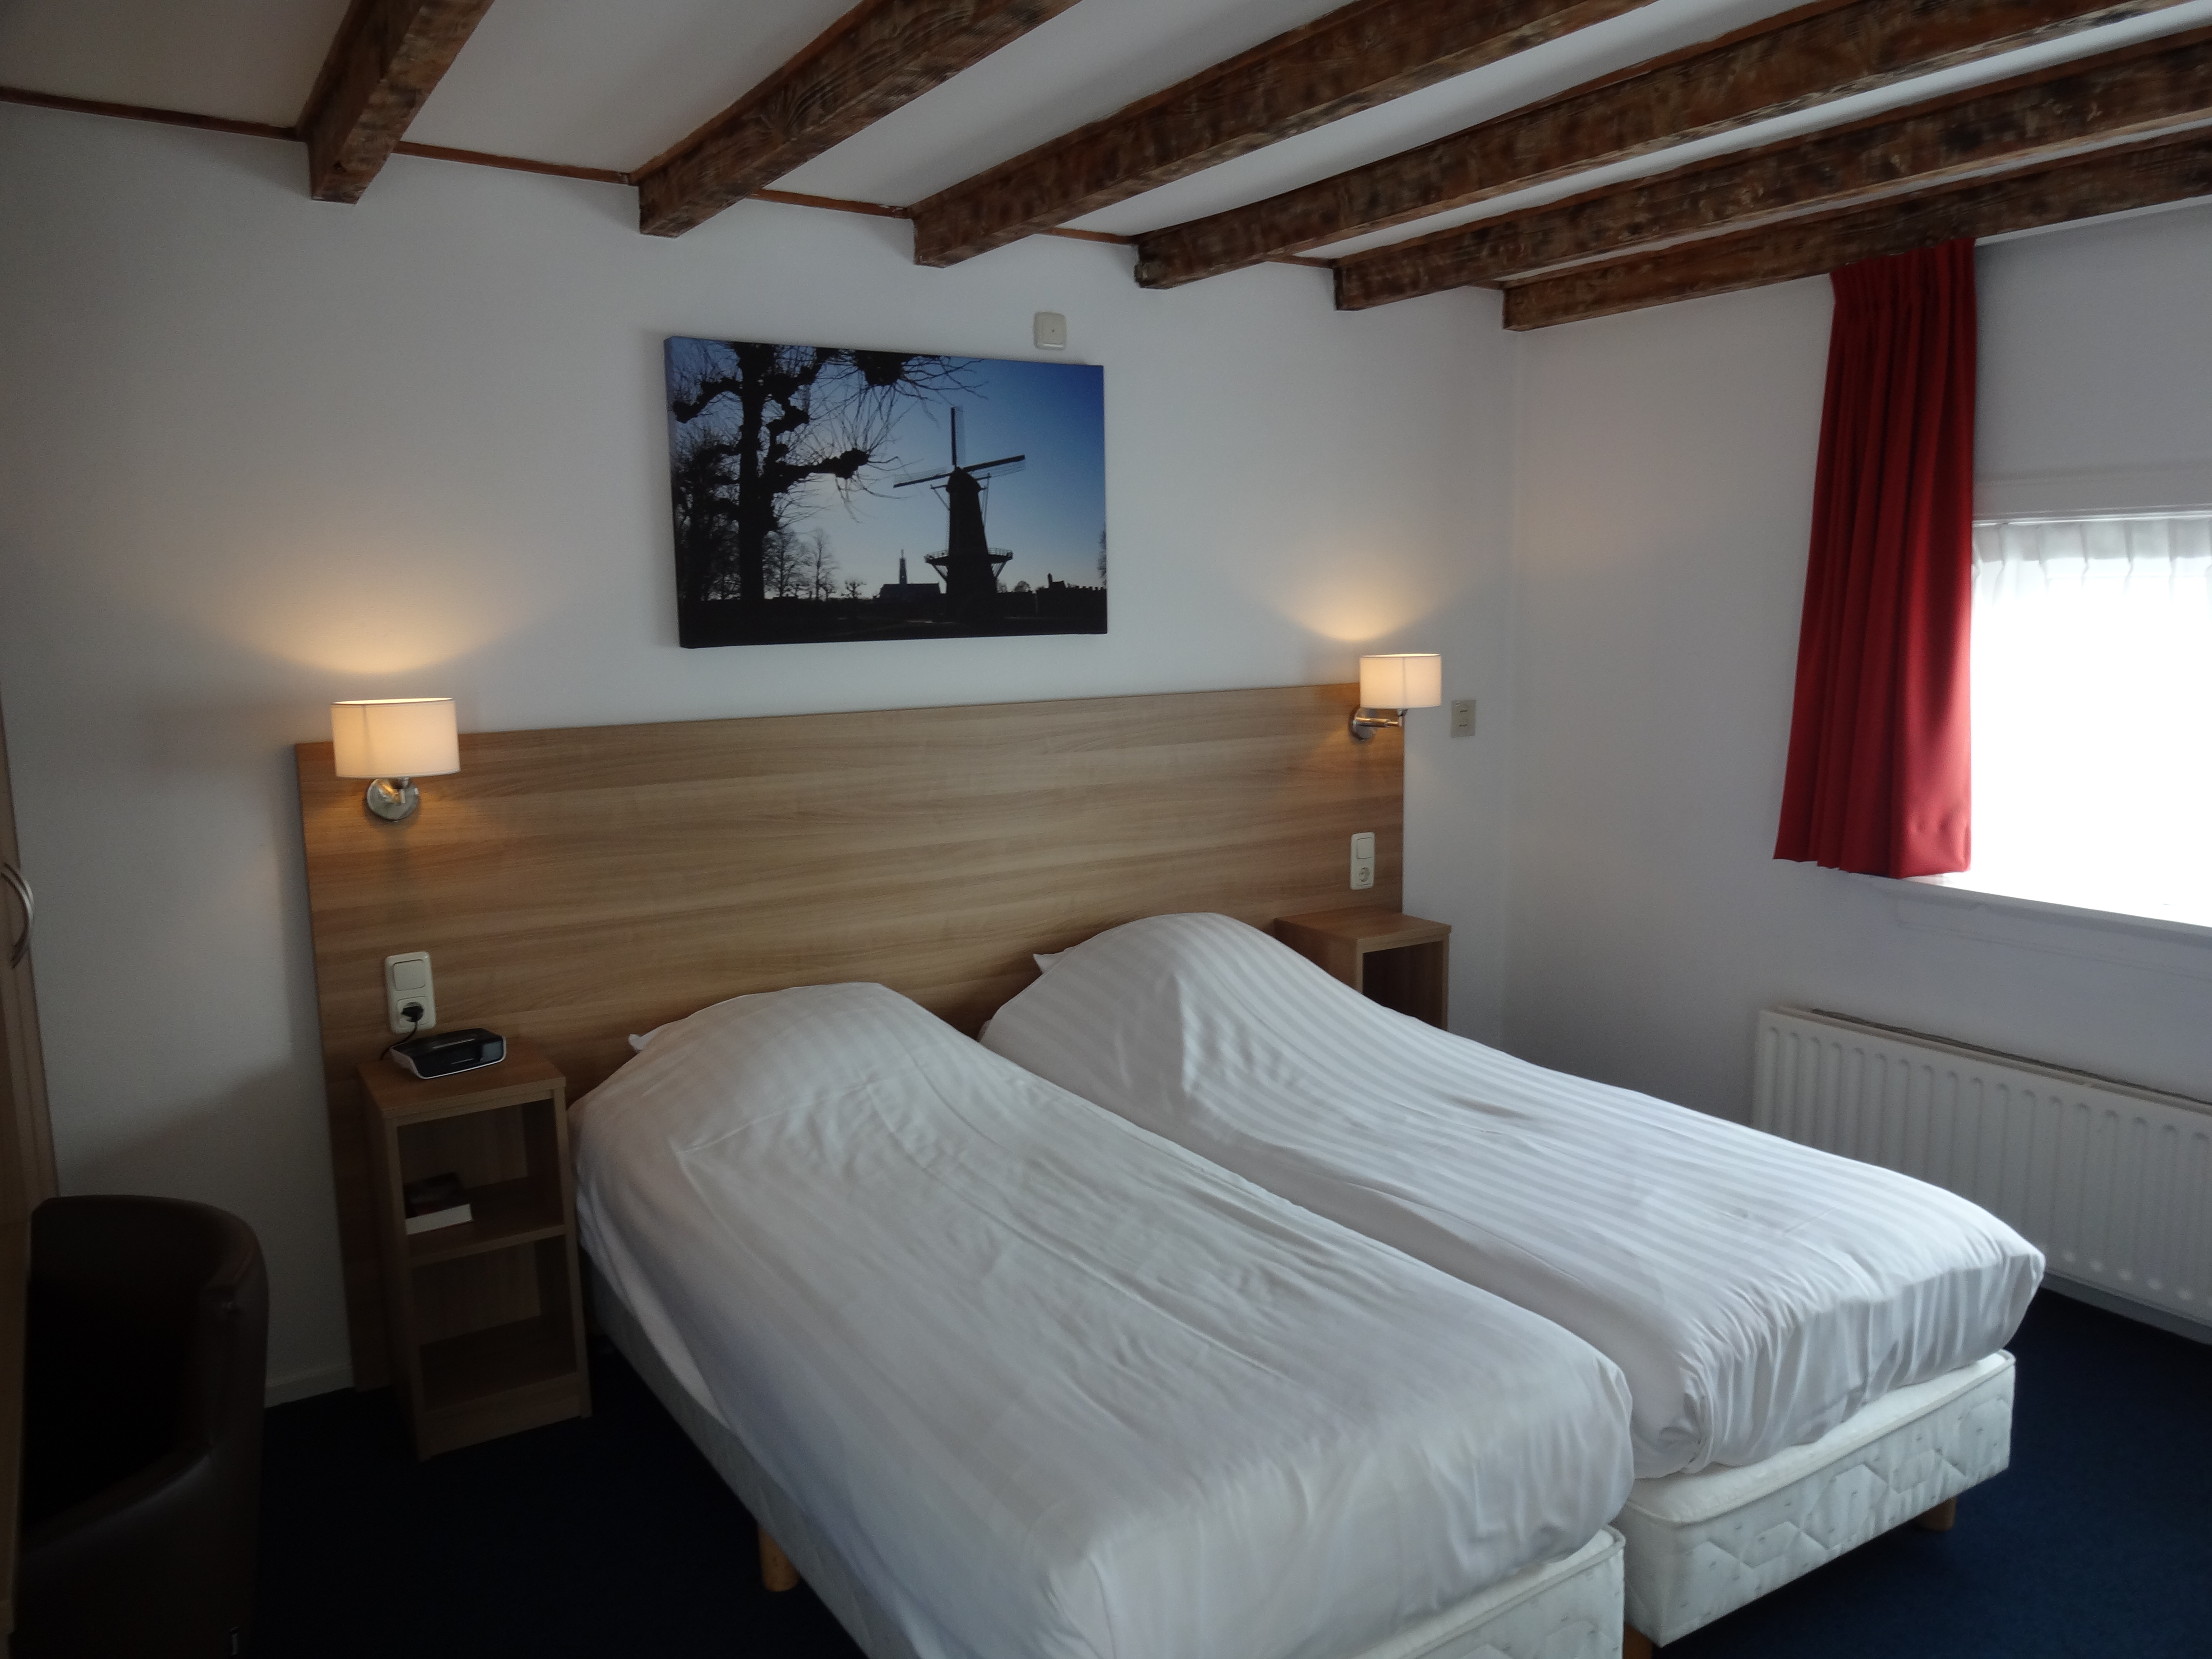 Hotel Hulst <br/>76.00 ew <br/> <a href='http://vakantieoplossing.nl/outpage/?id=845840b5b8a5ad976346db1a8fe899d6' target='_blank'>View Details</a>